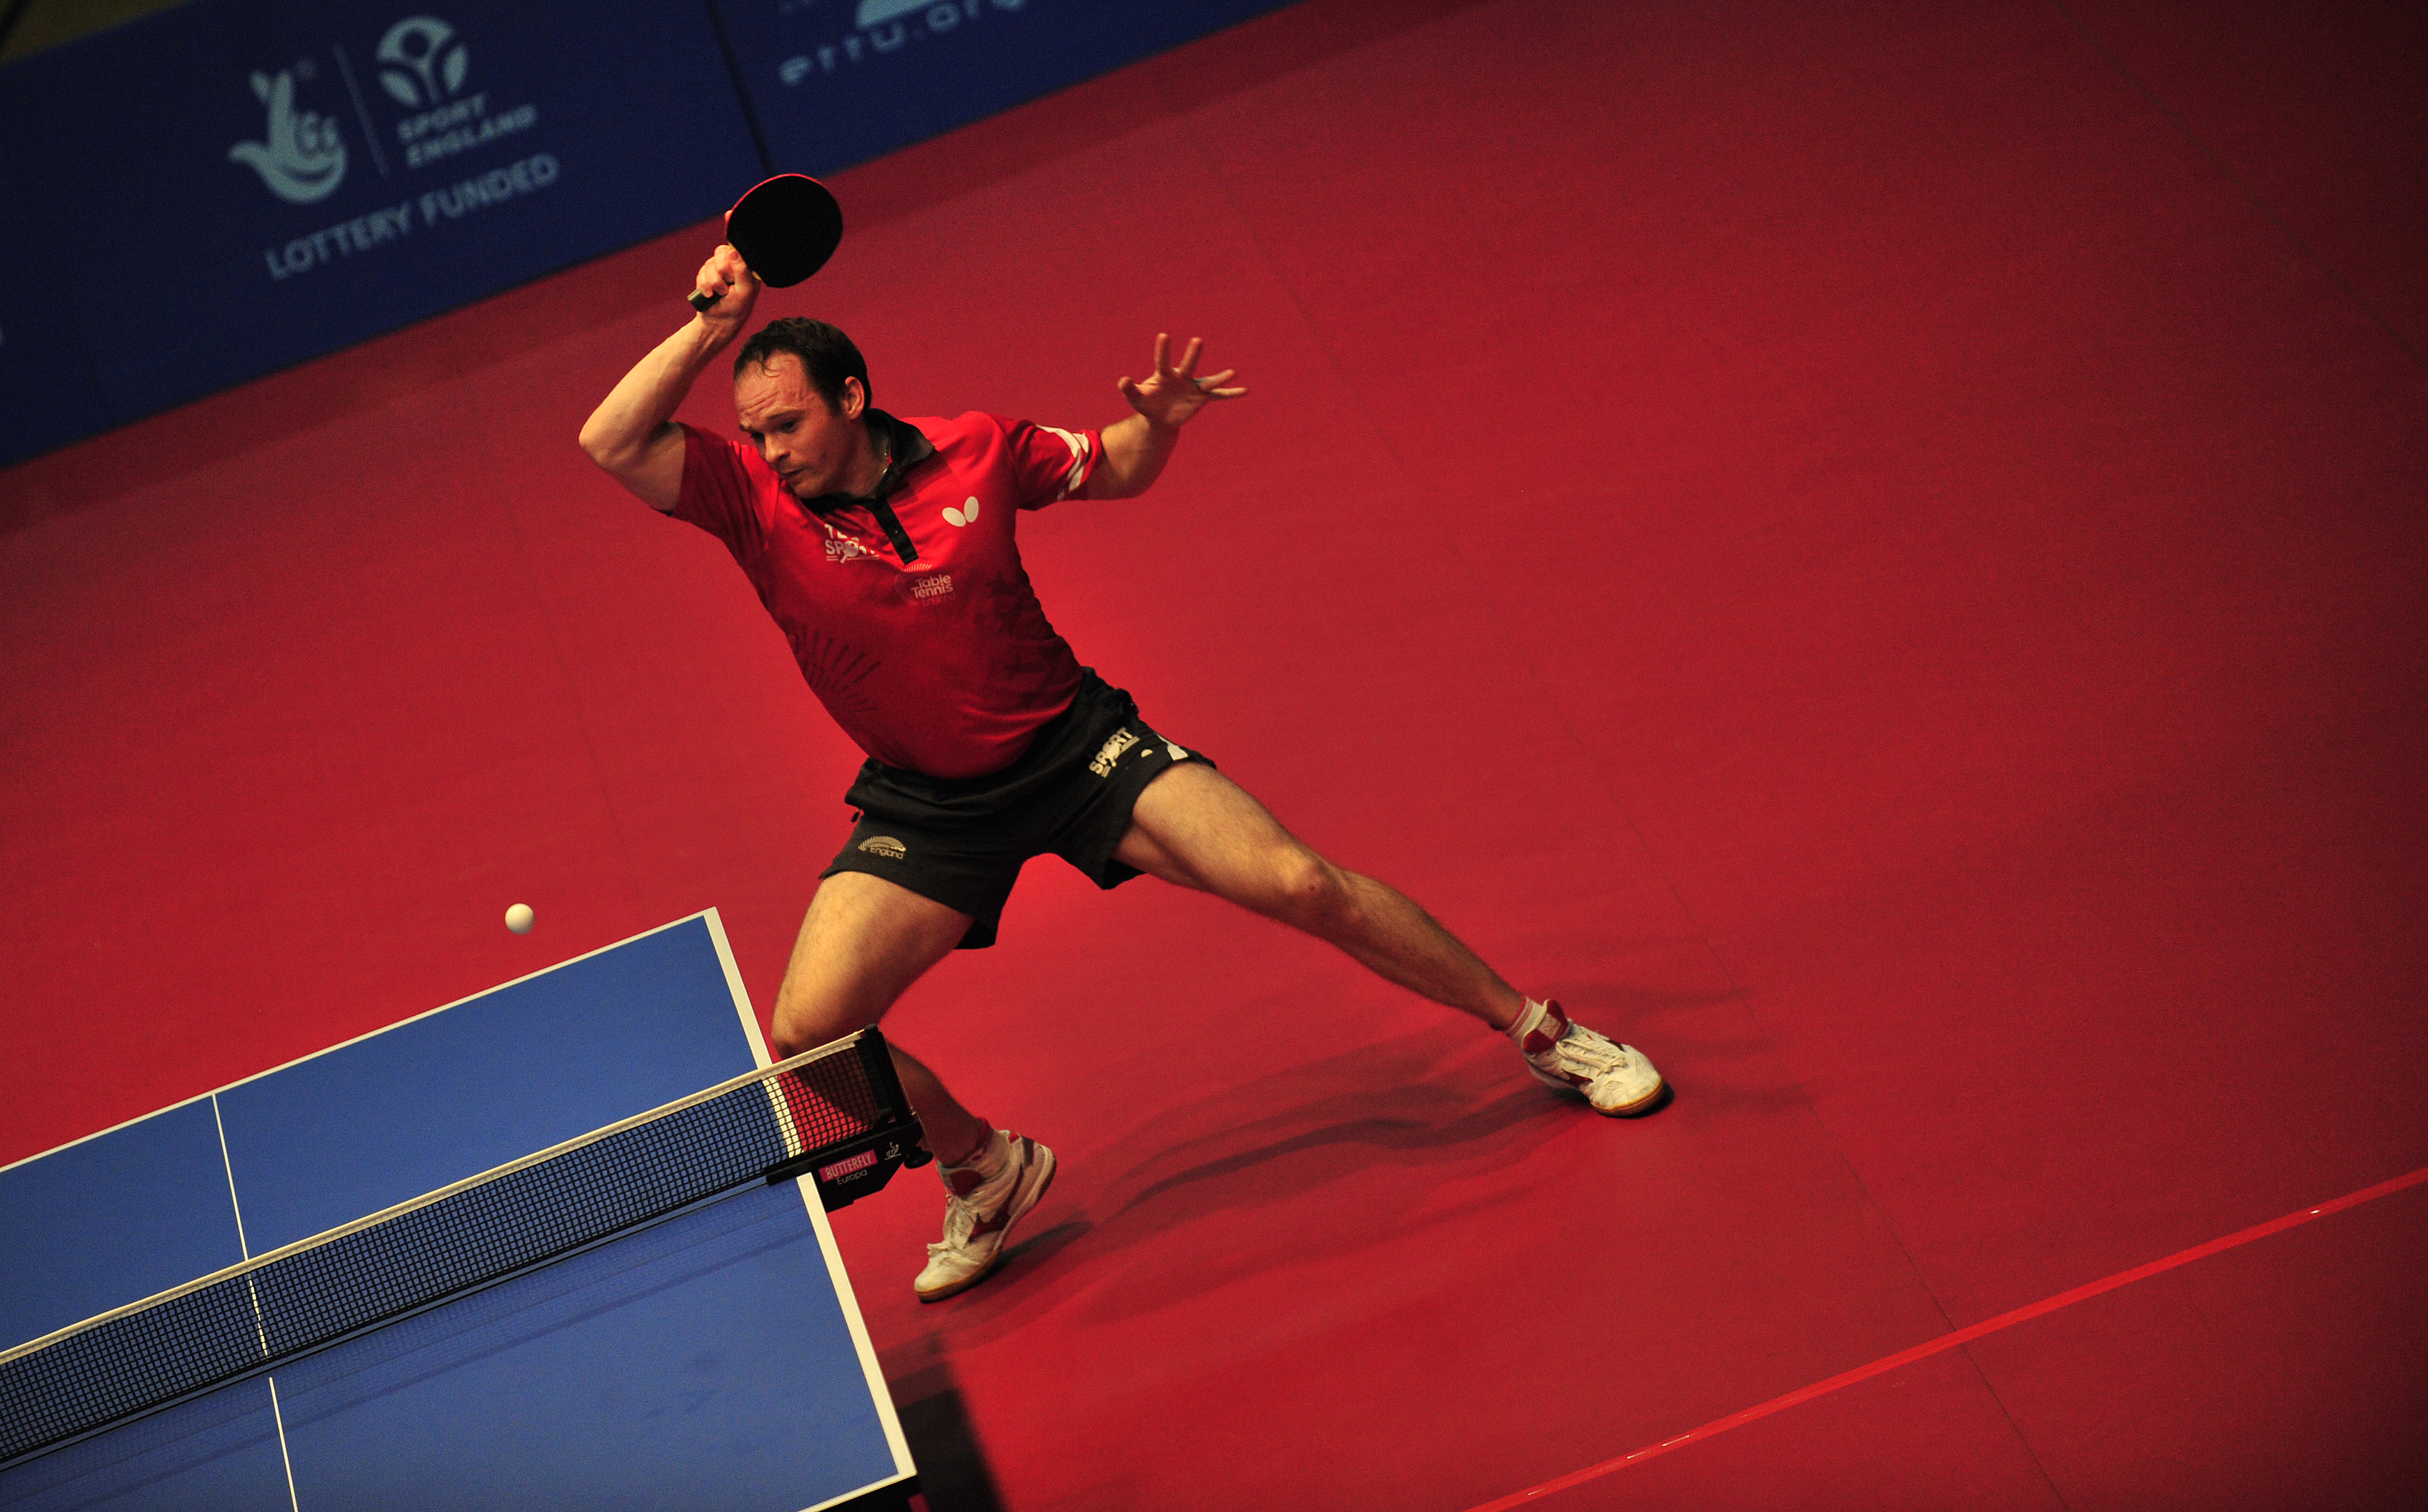 England Table Tennis Success – Live Coverage by 1080 Media TV